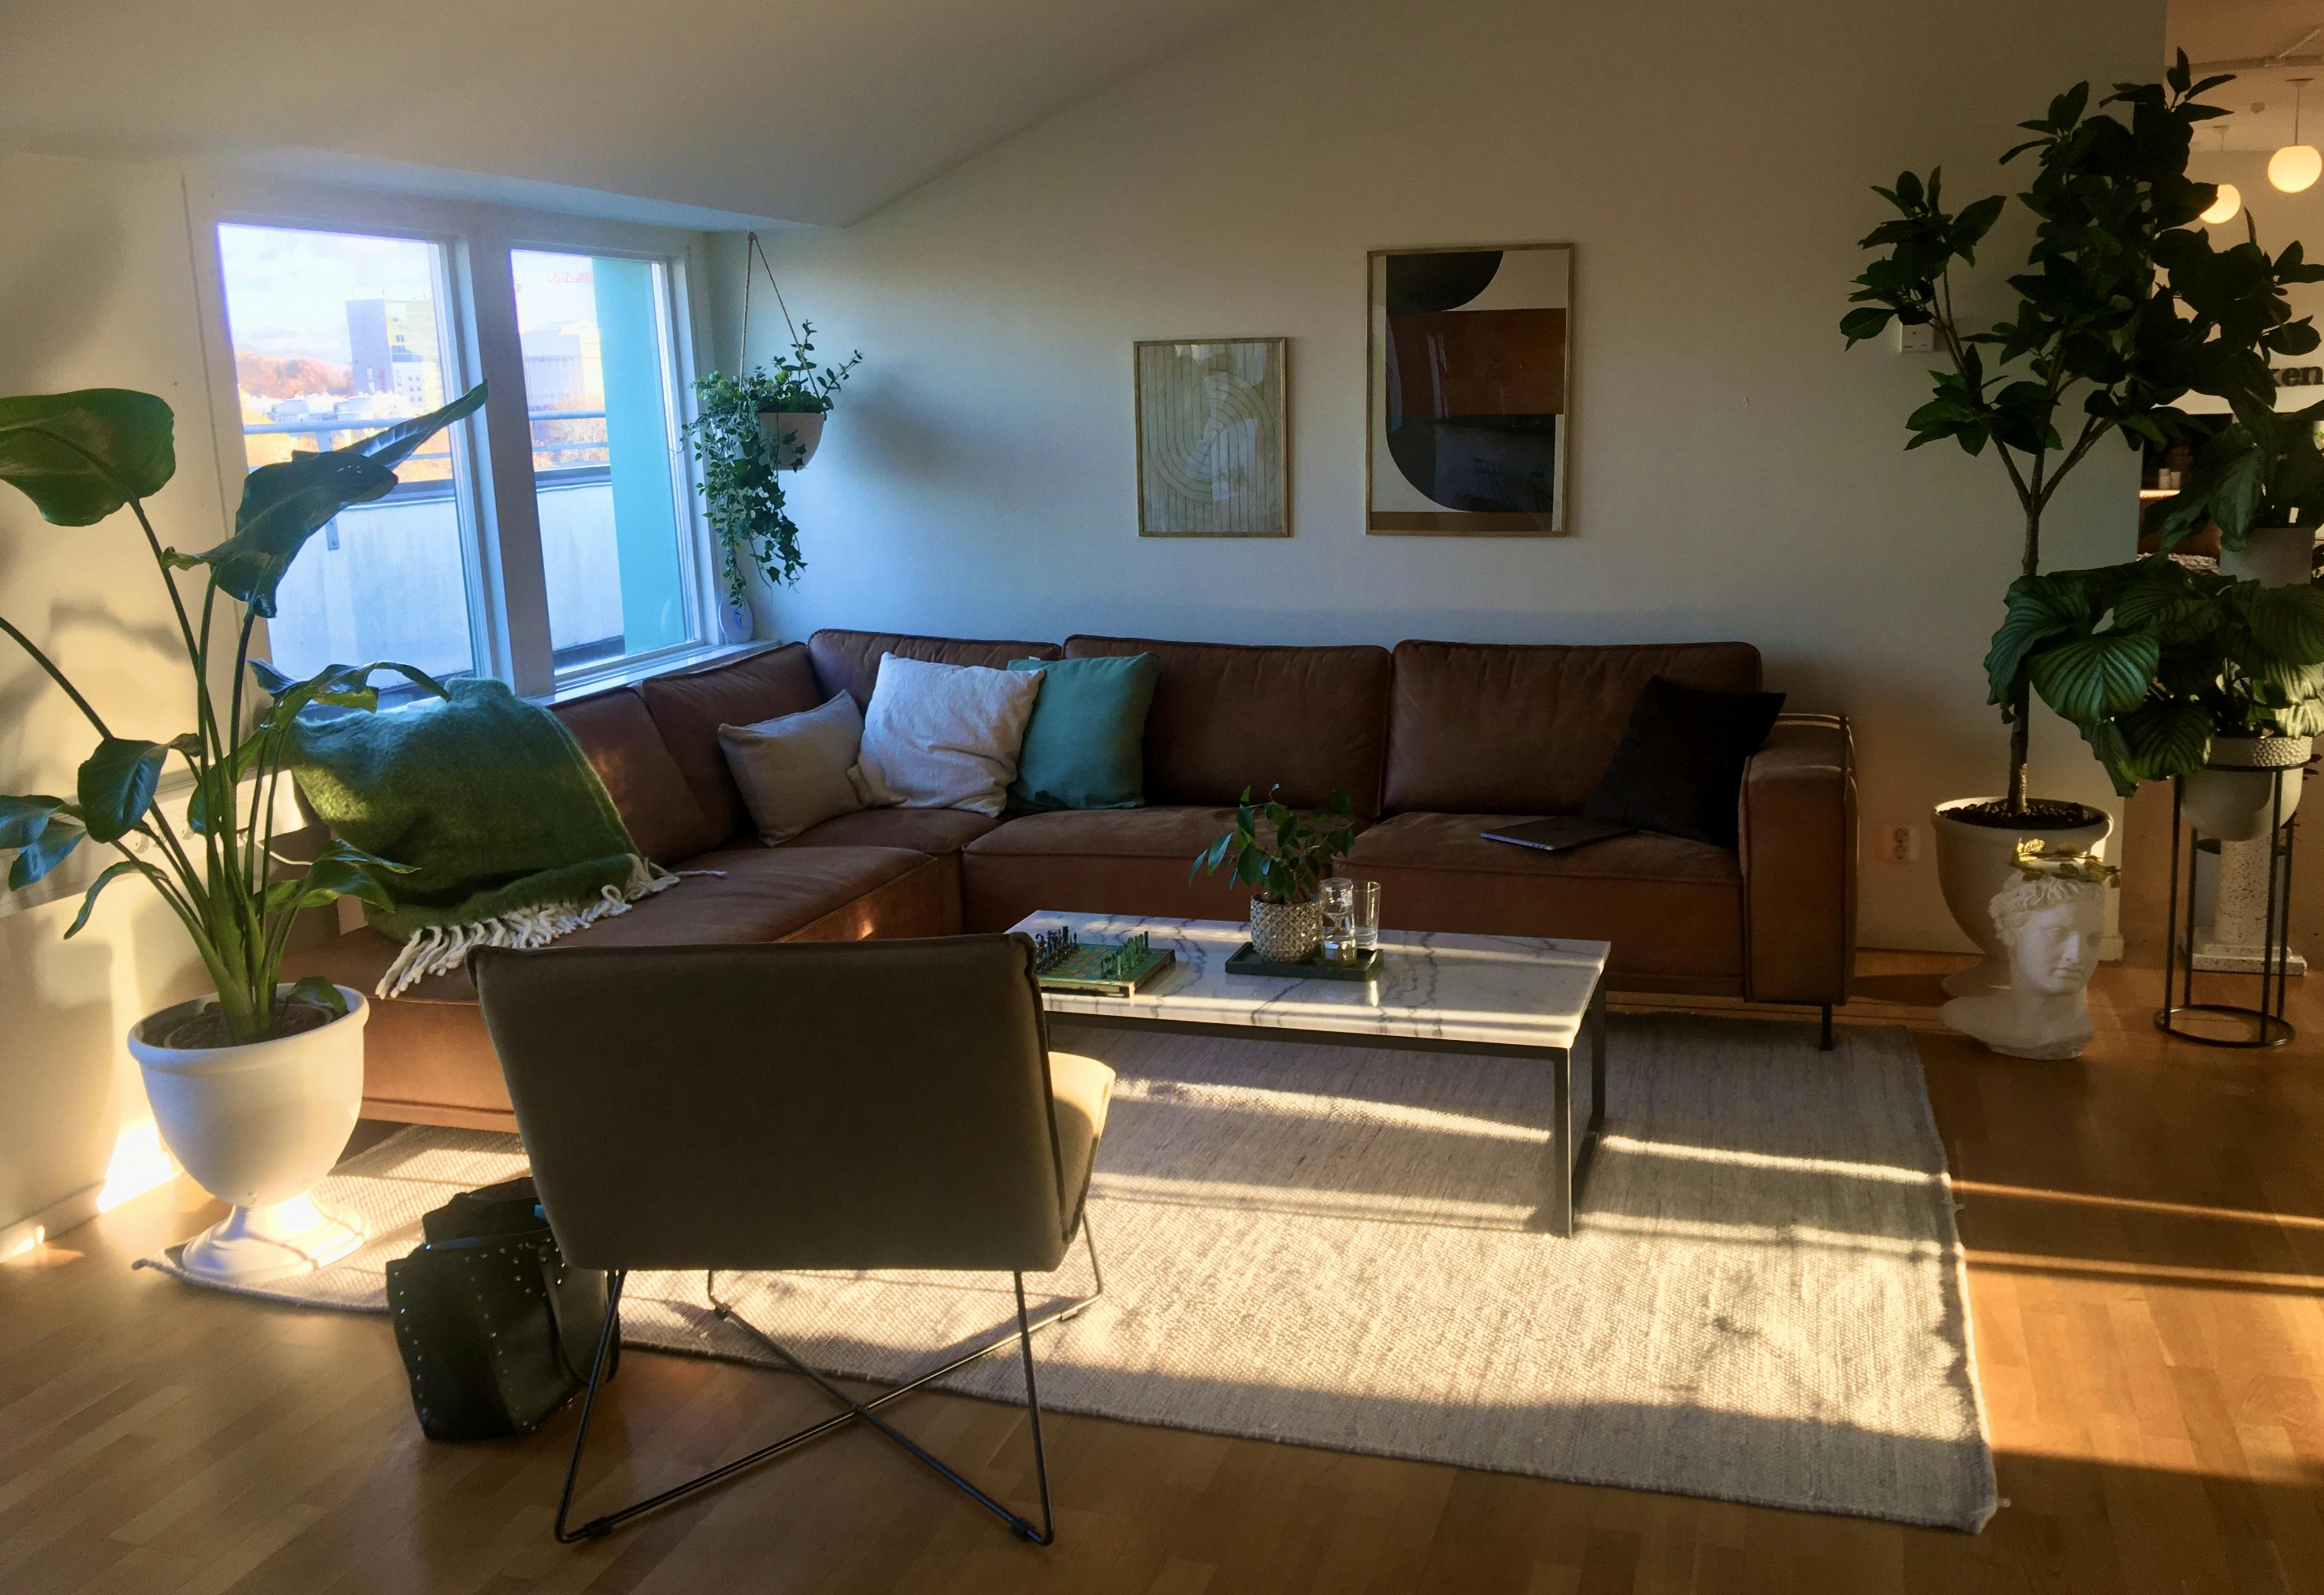 A cozy room containing a big sofa, a chair, a living room table, paintings on the wall and several plants.